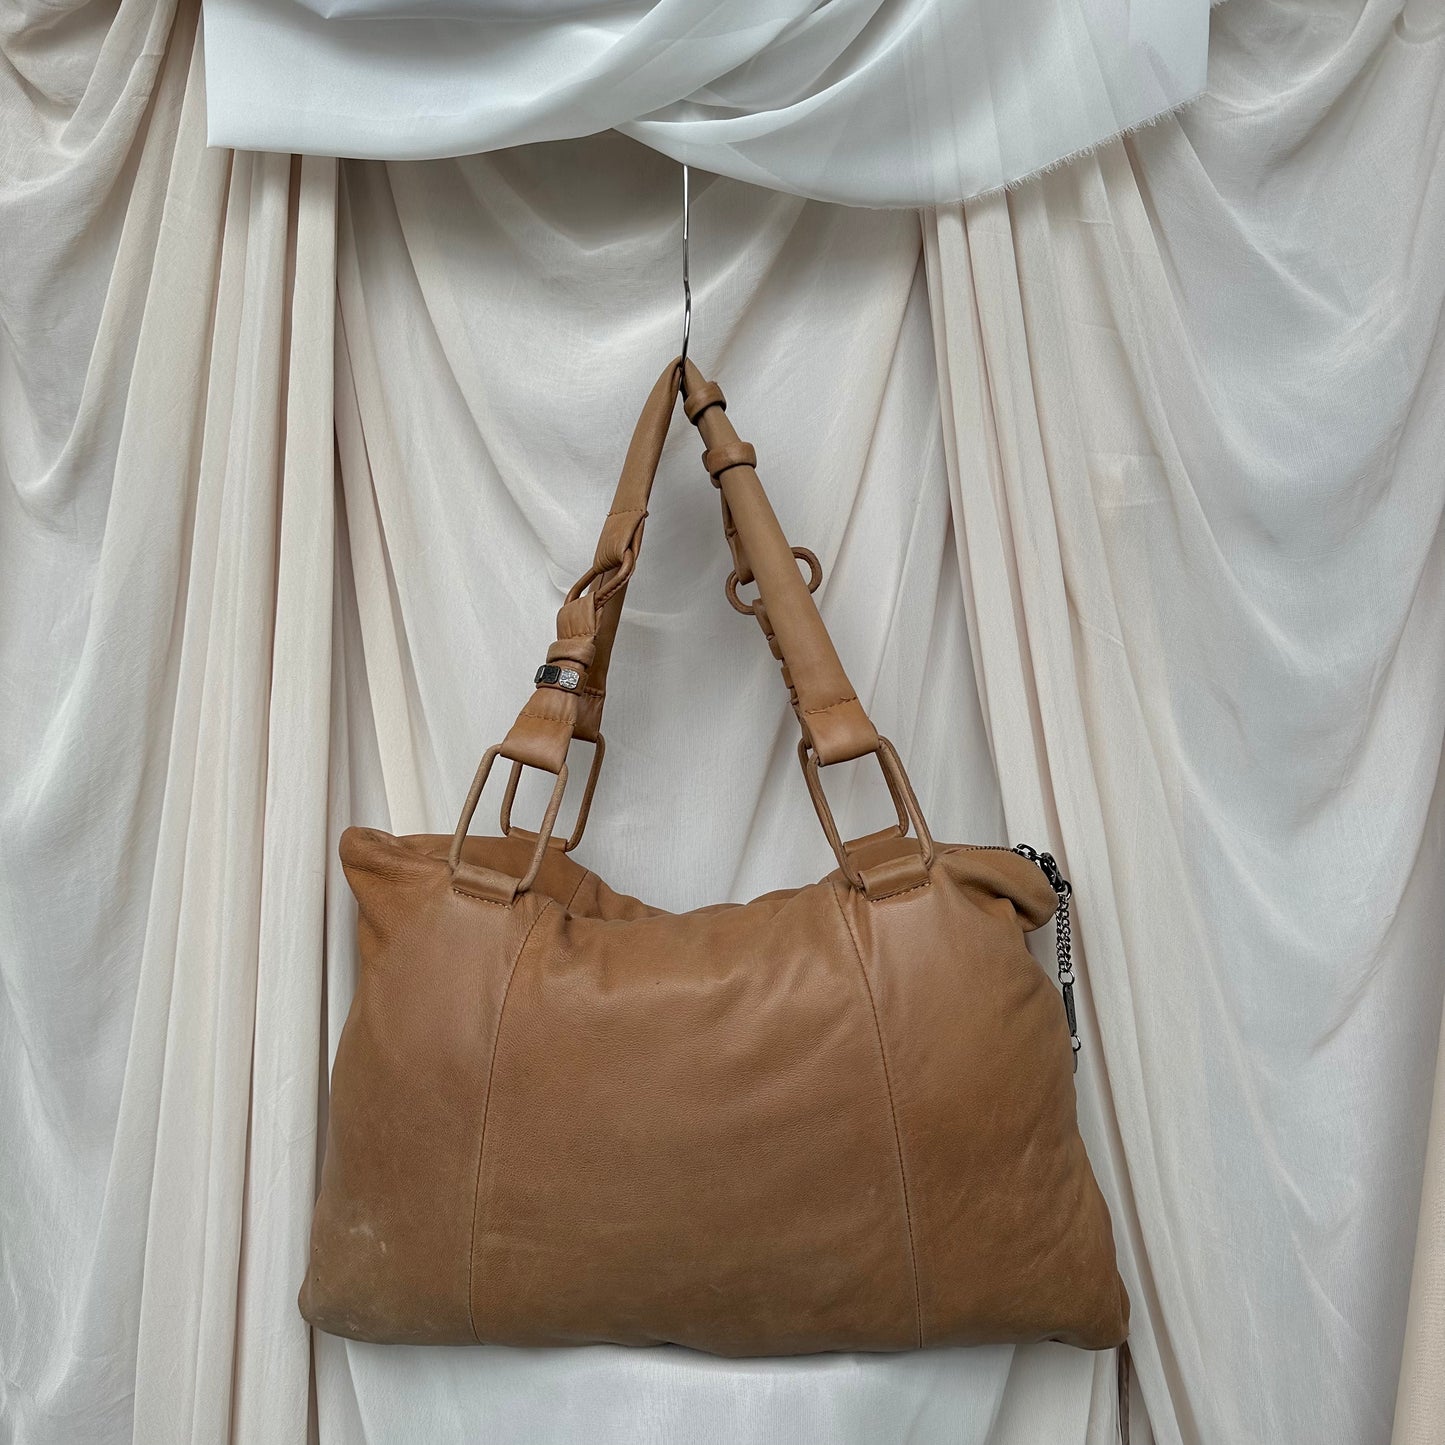 LEATHER PADDED PILLOW BAG IN TAN by Diesel